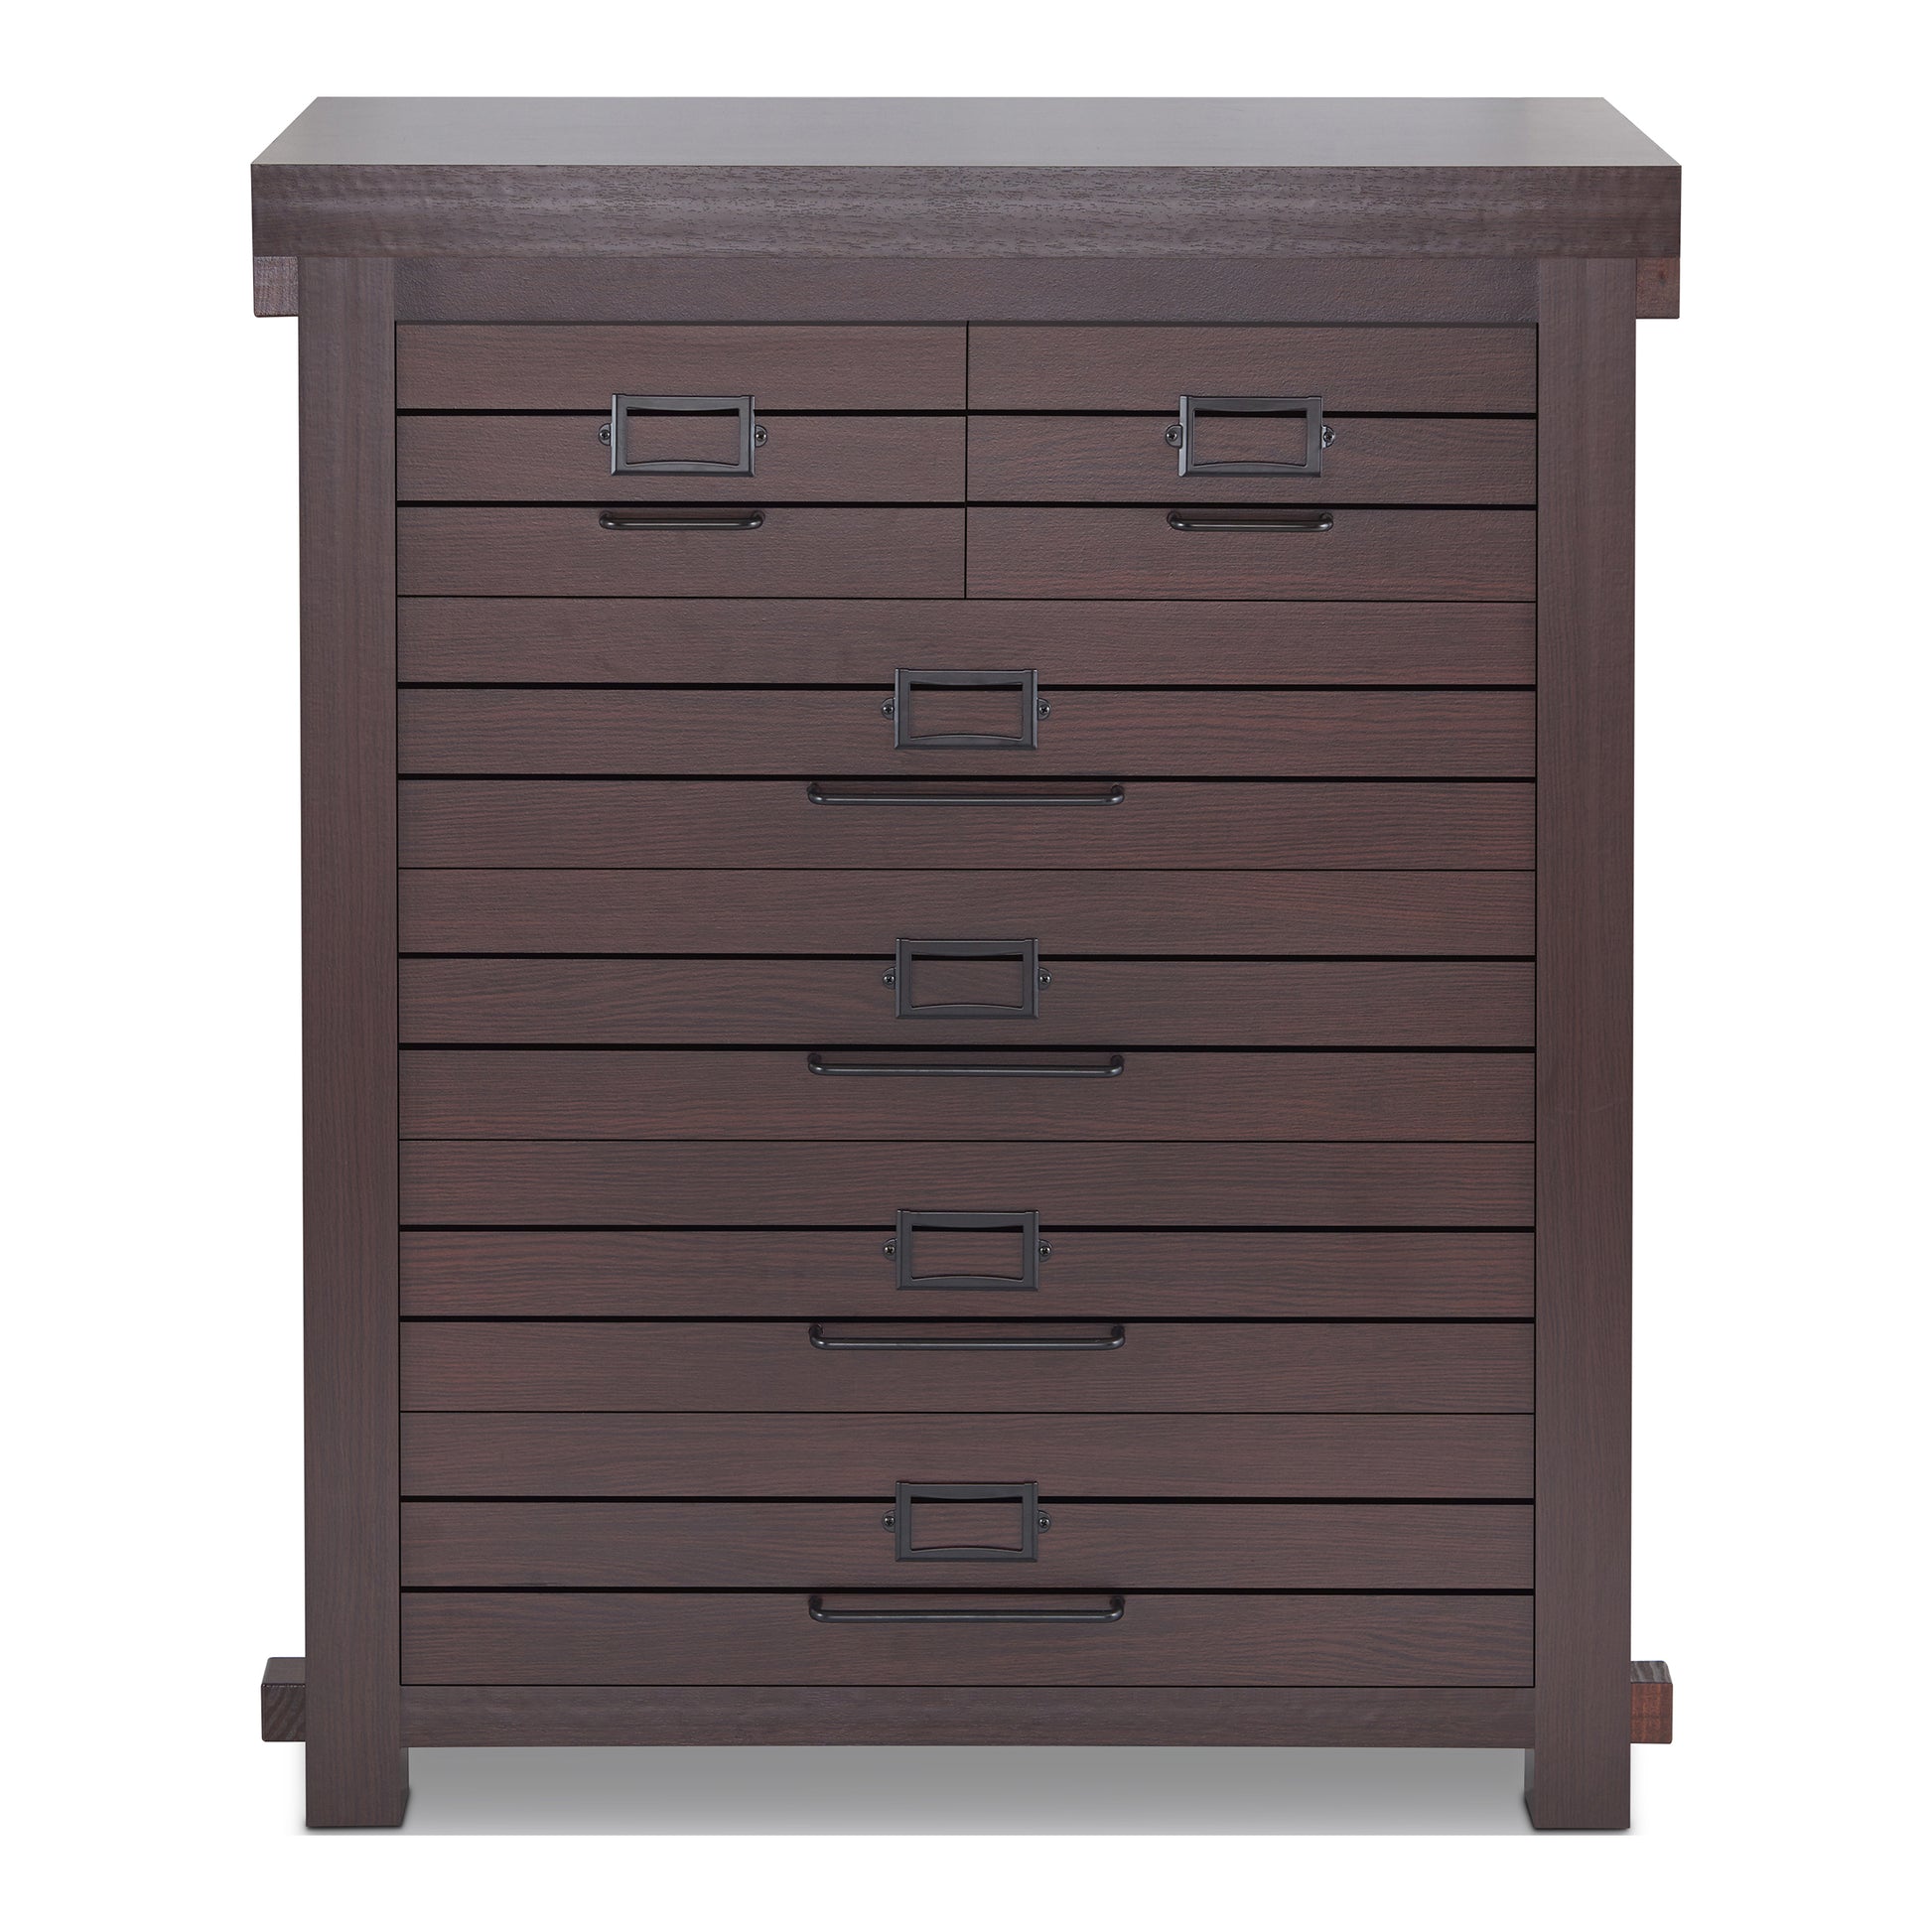 Front-facing rustic espresso six-drawer plank chest dresser on a white background